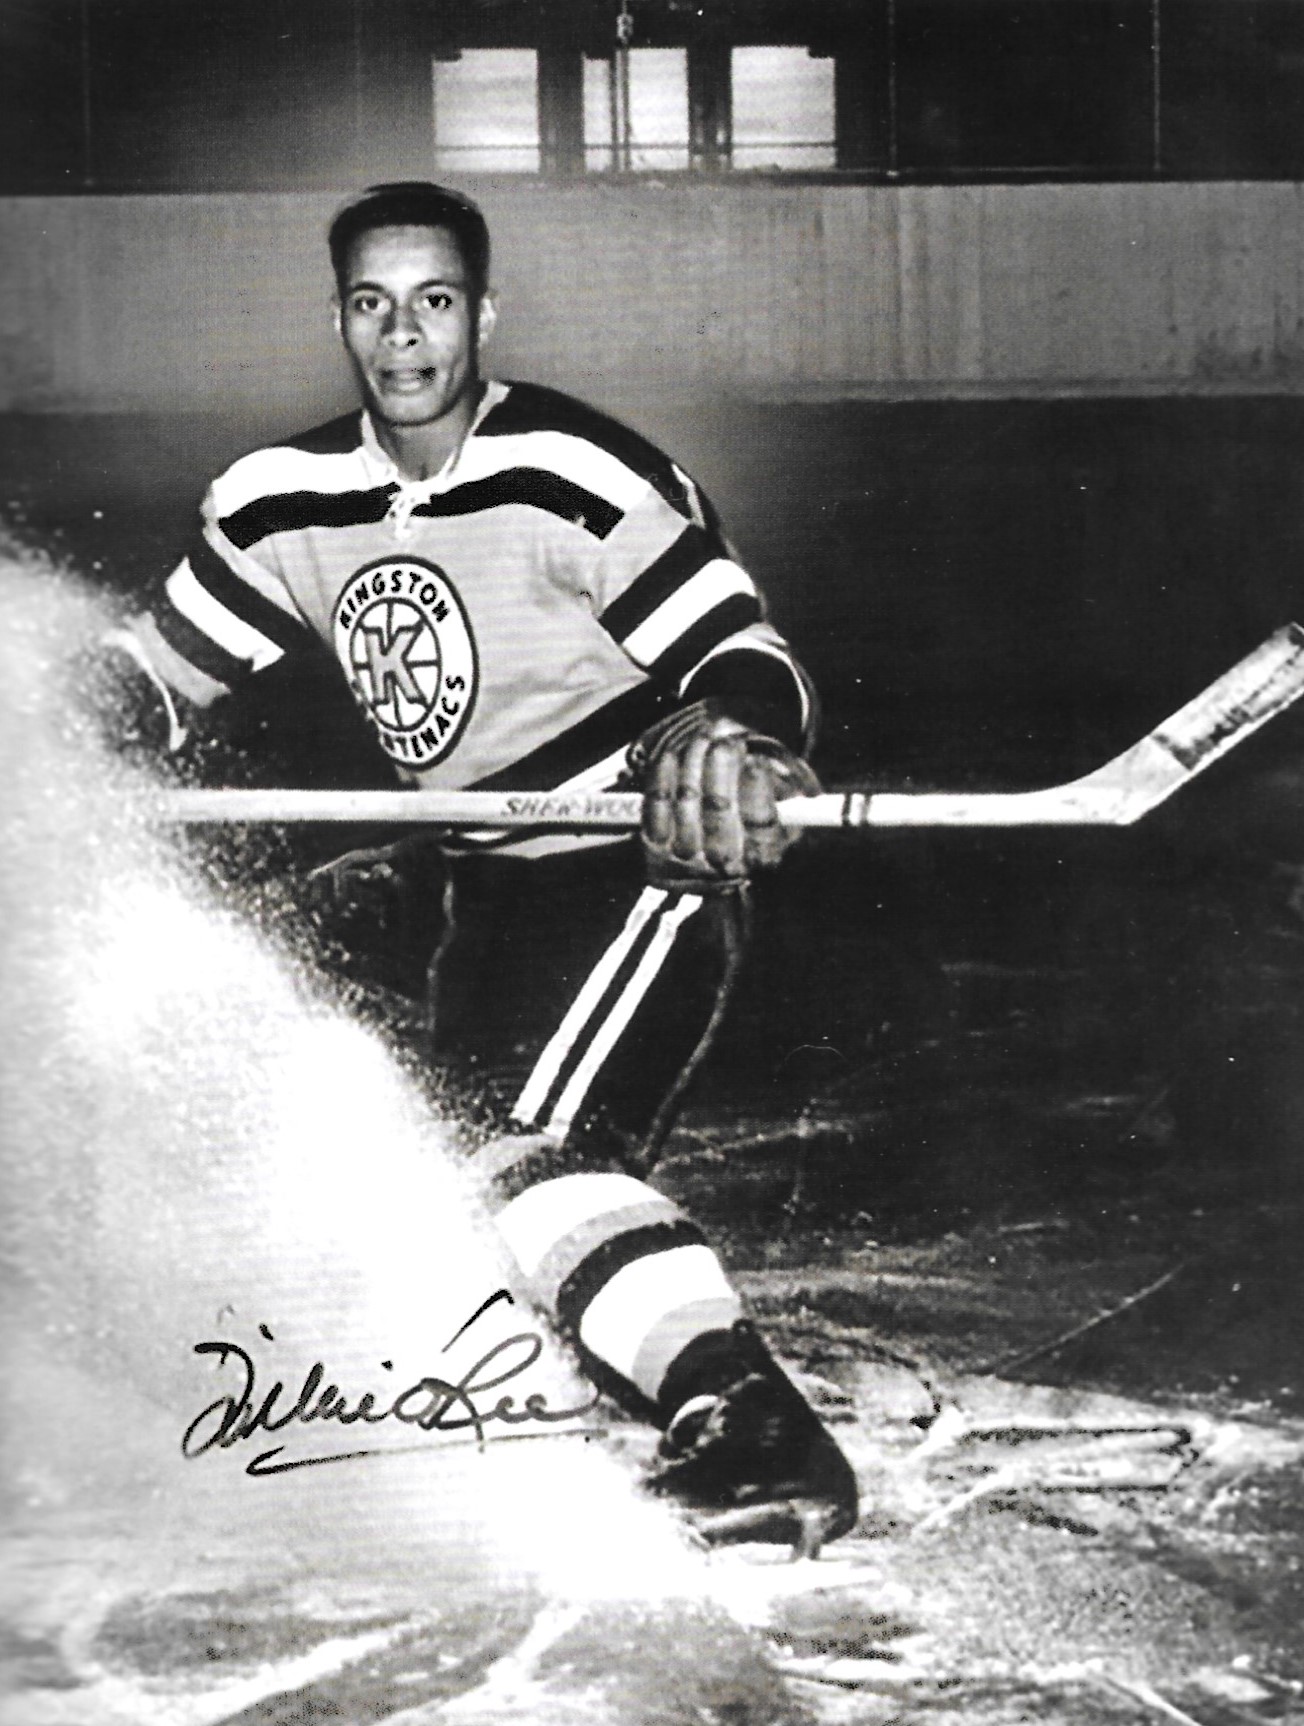 Willie O'Ree looked past and fought through racism to become NHL's 1st  Black player